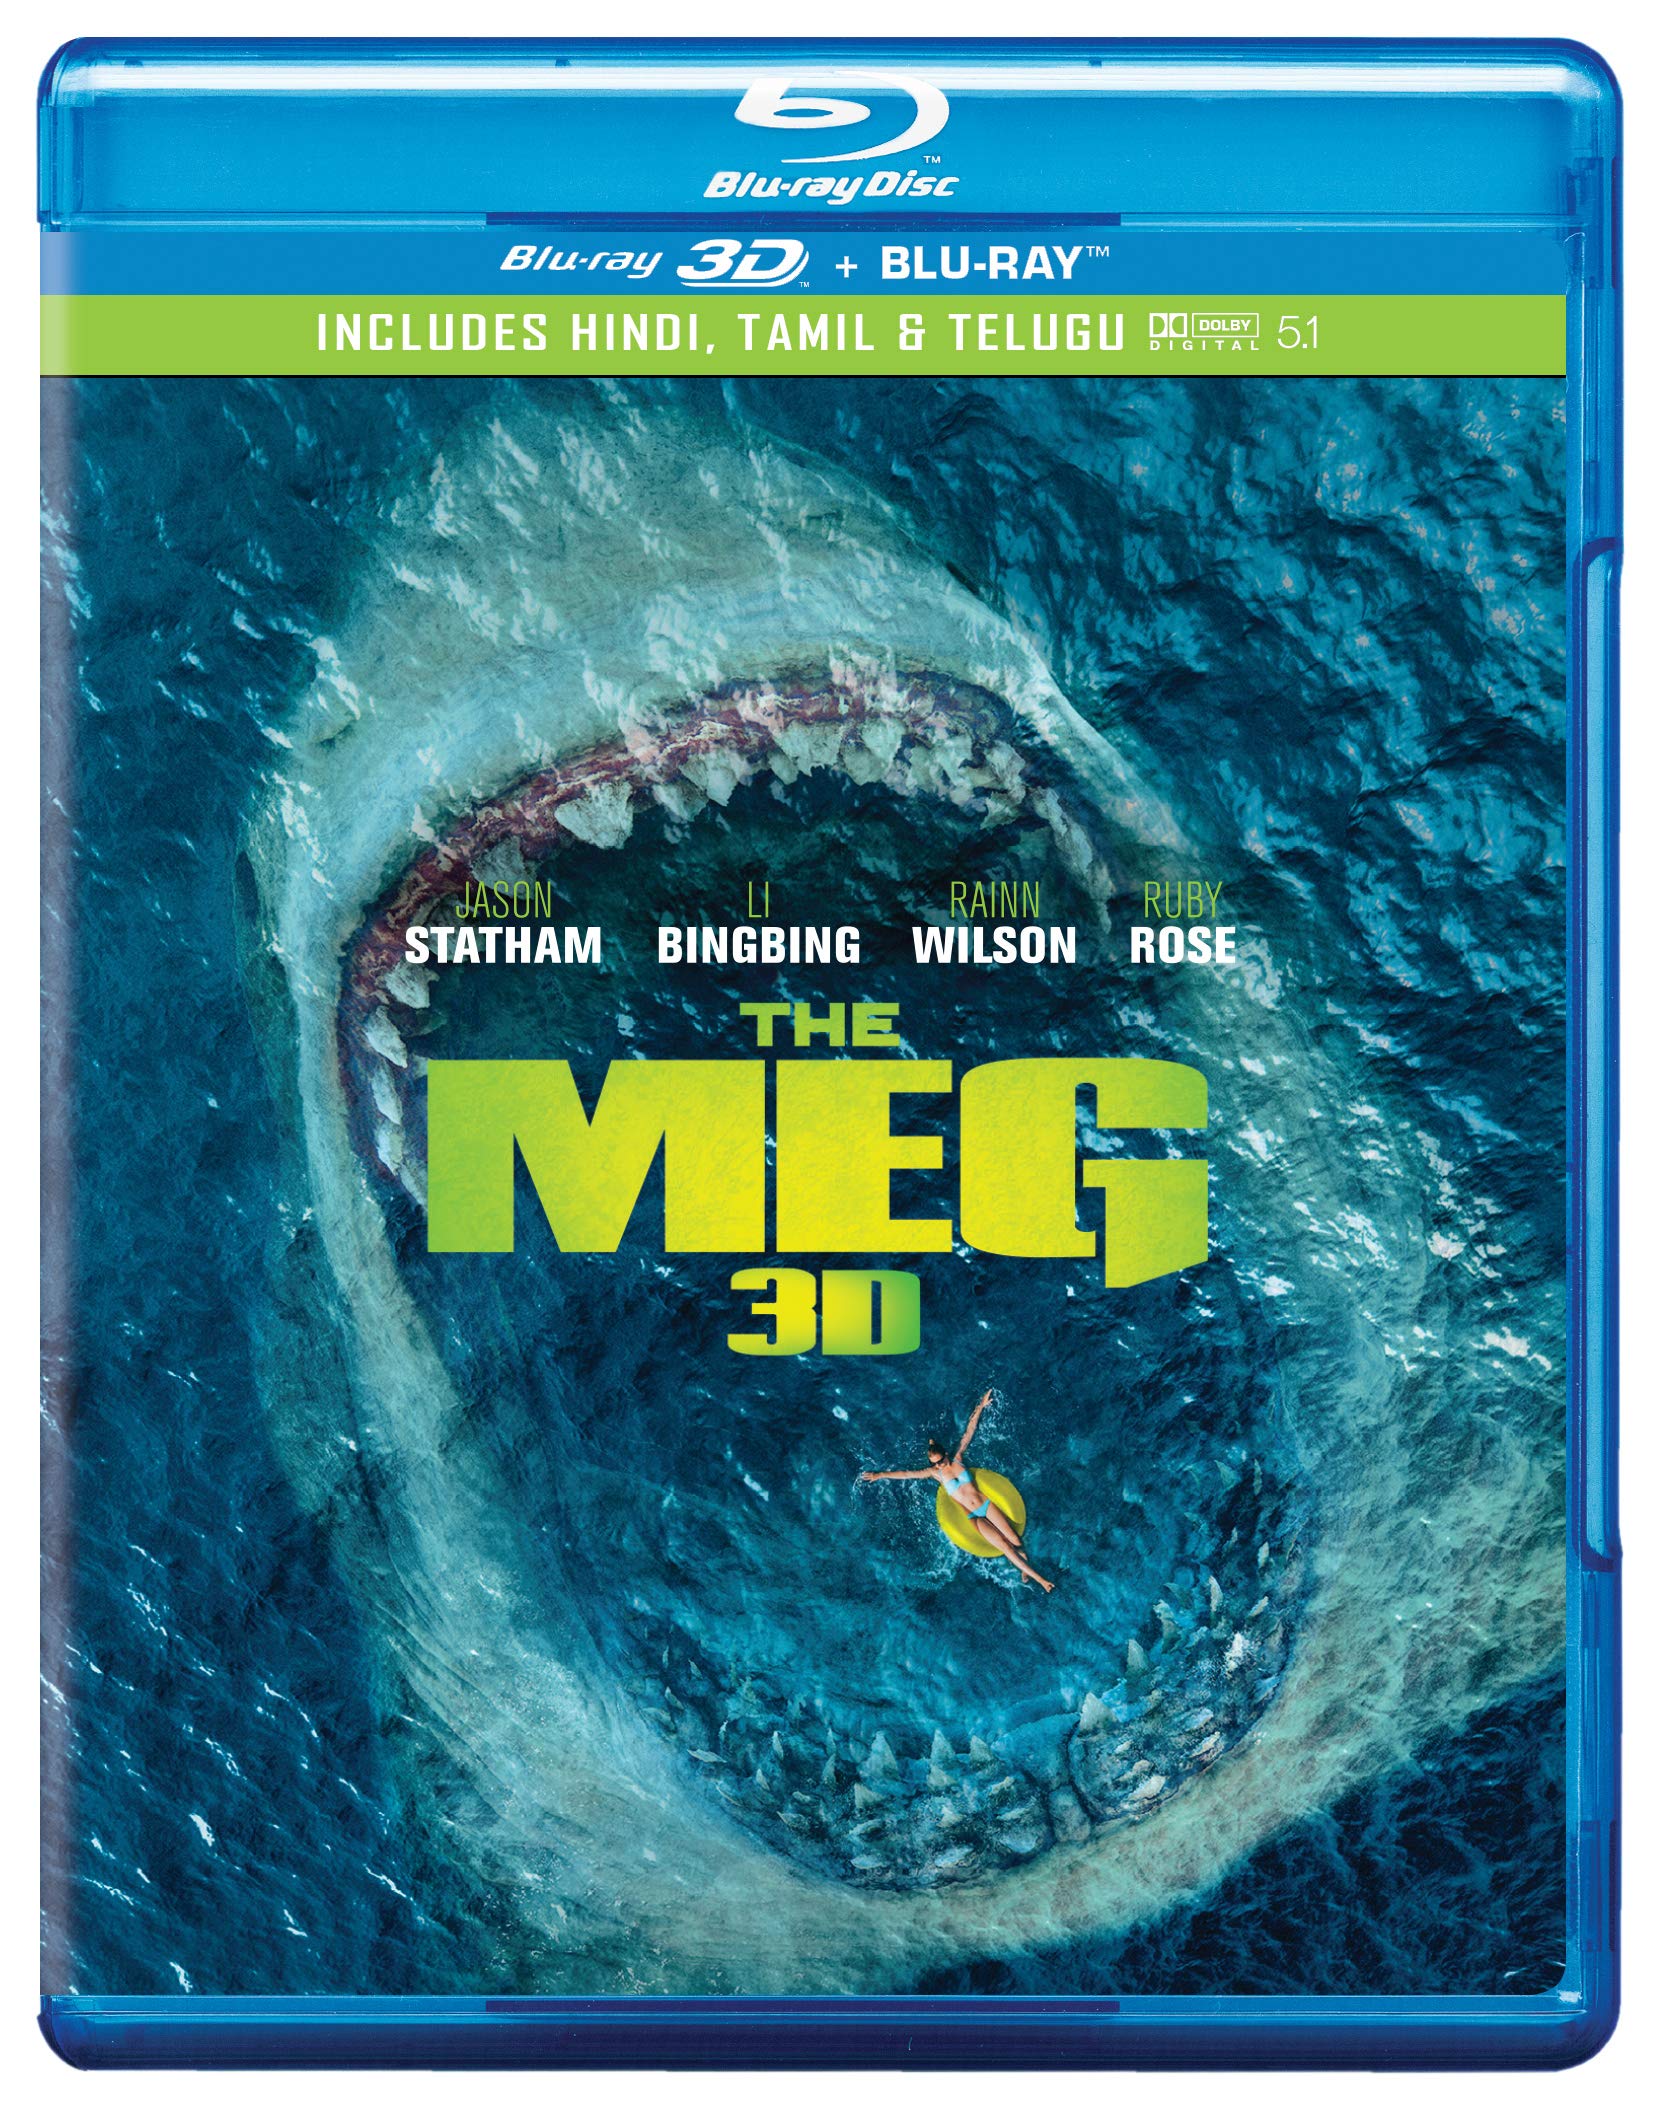 the-meg-blu-ray-3d-blu-ray-movie-purchase-or-watch-online